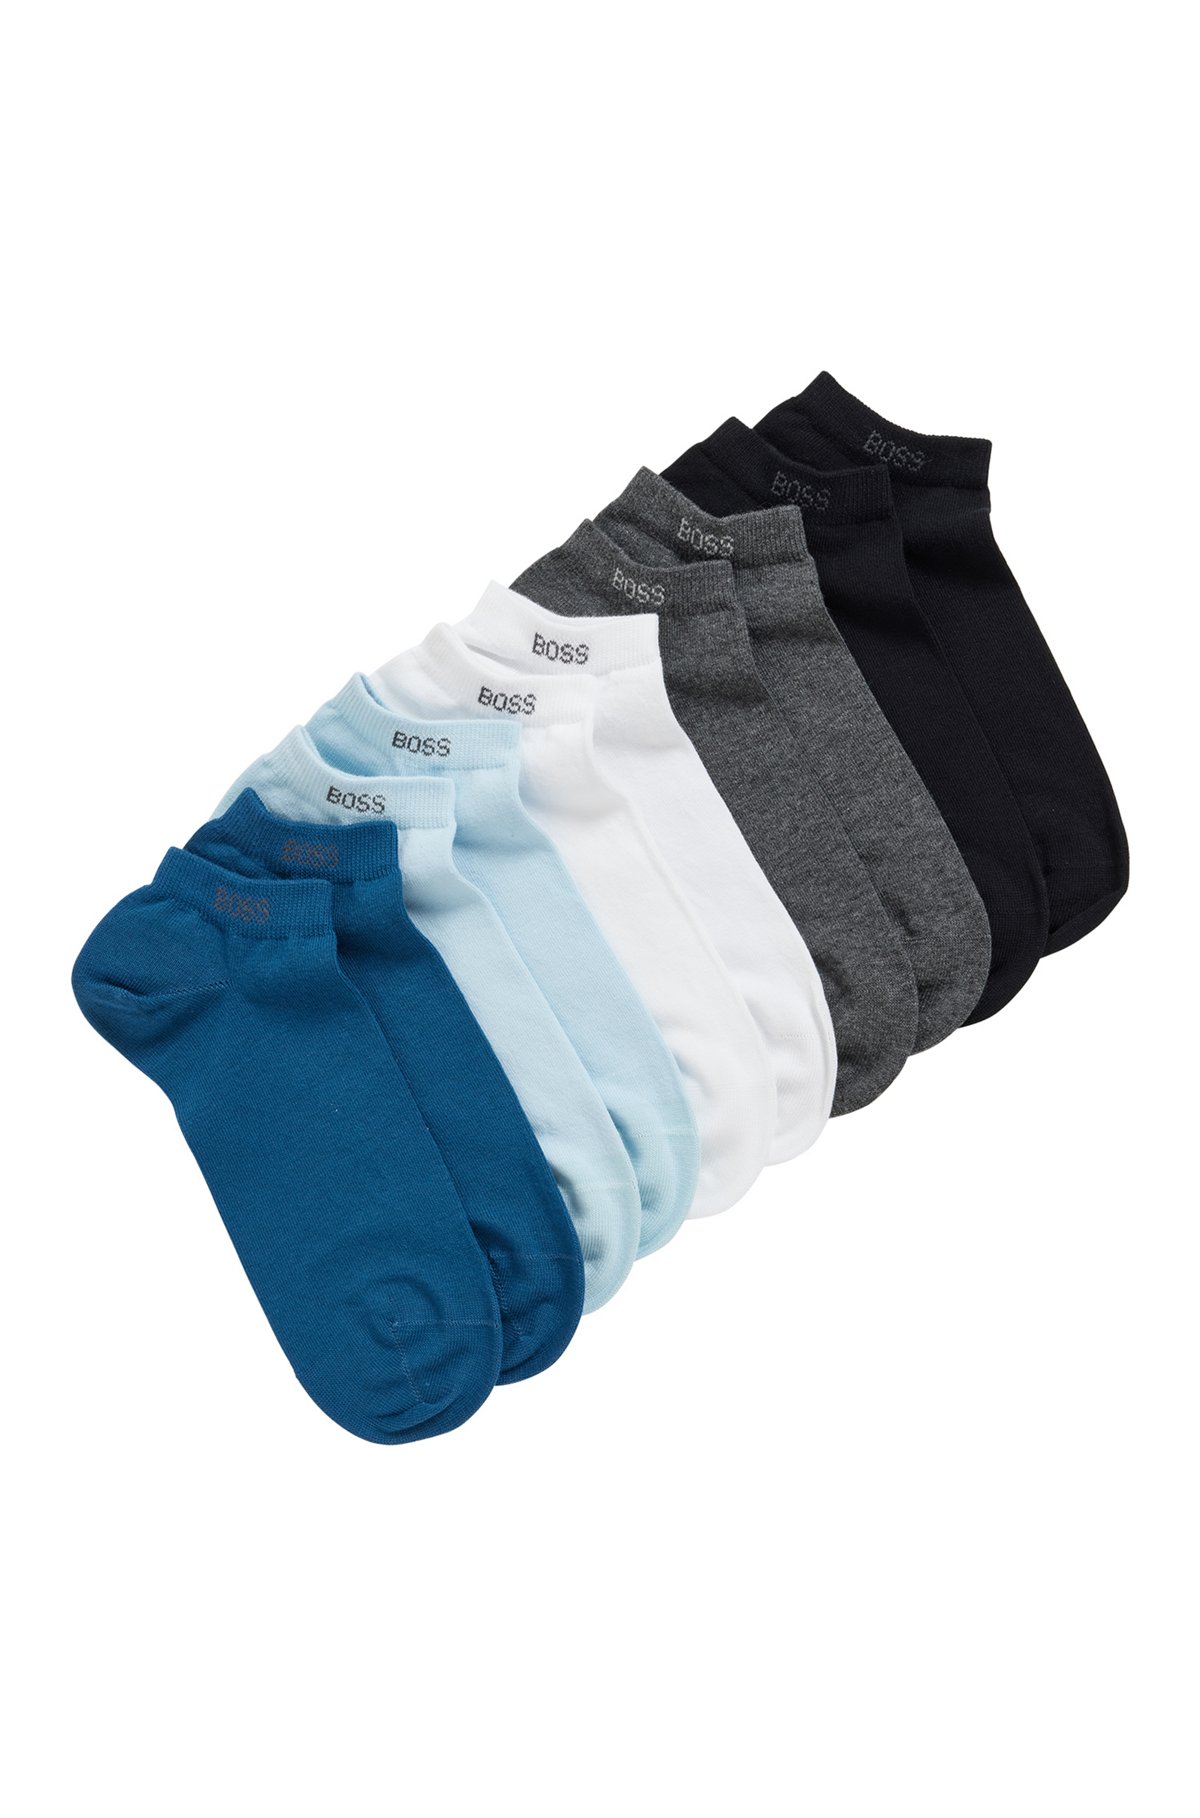 Five-pack of ankle socks in a cotton blend, Black / Grey / Blue